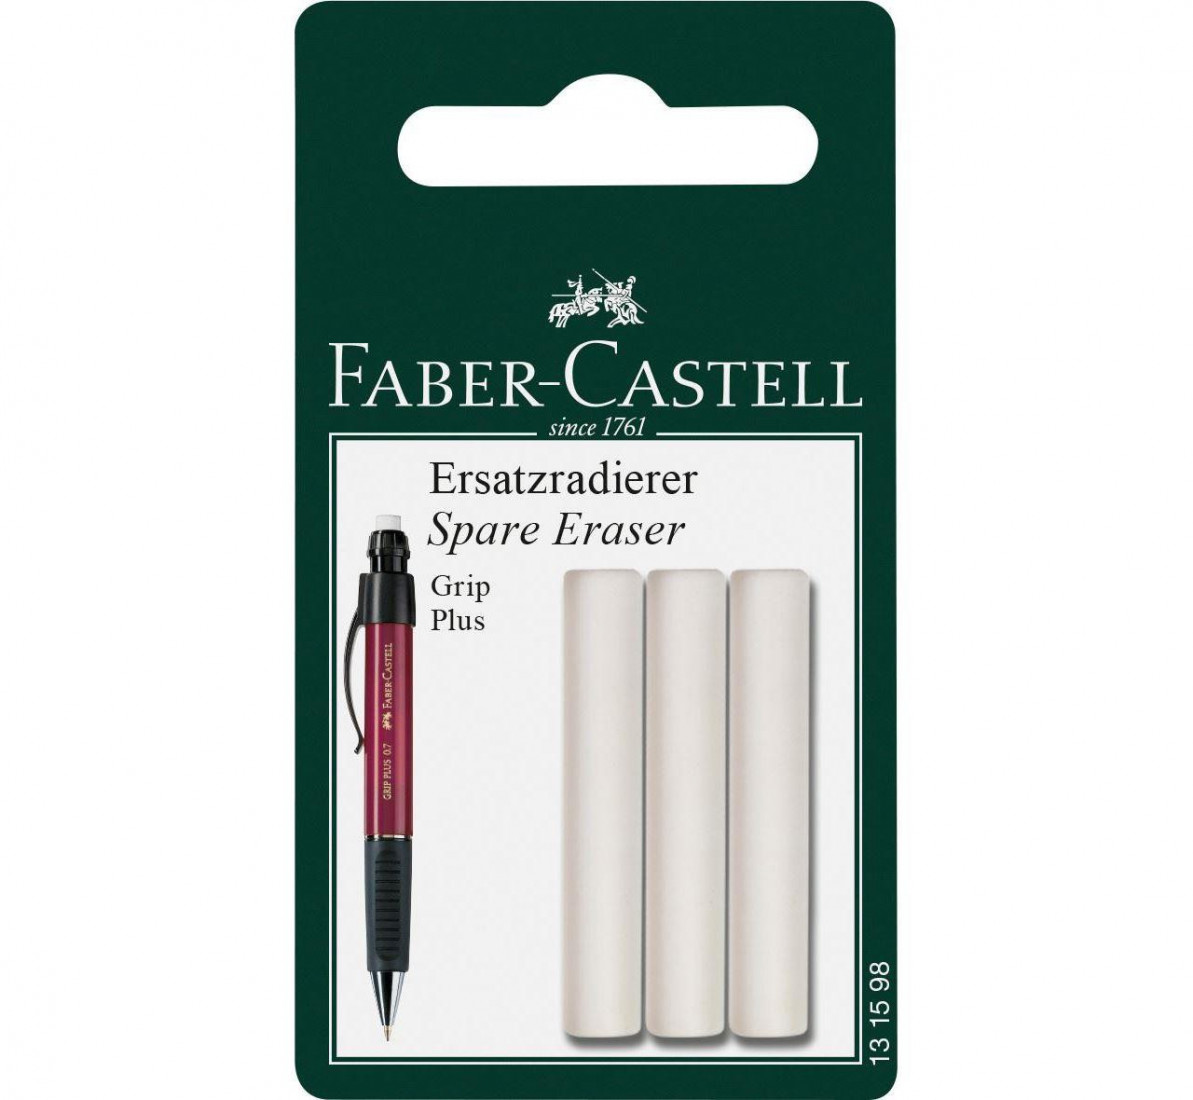 Faber Castell Grip Plus spare erasers for mechanical pencil, pack of 3, 131598